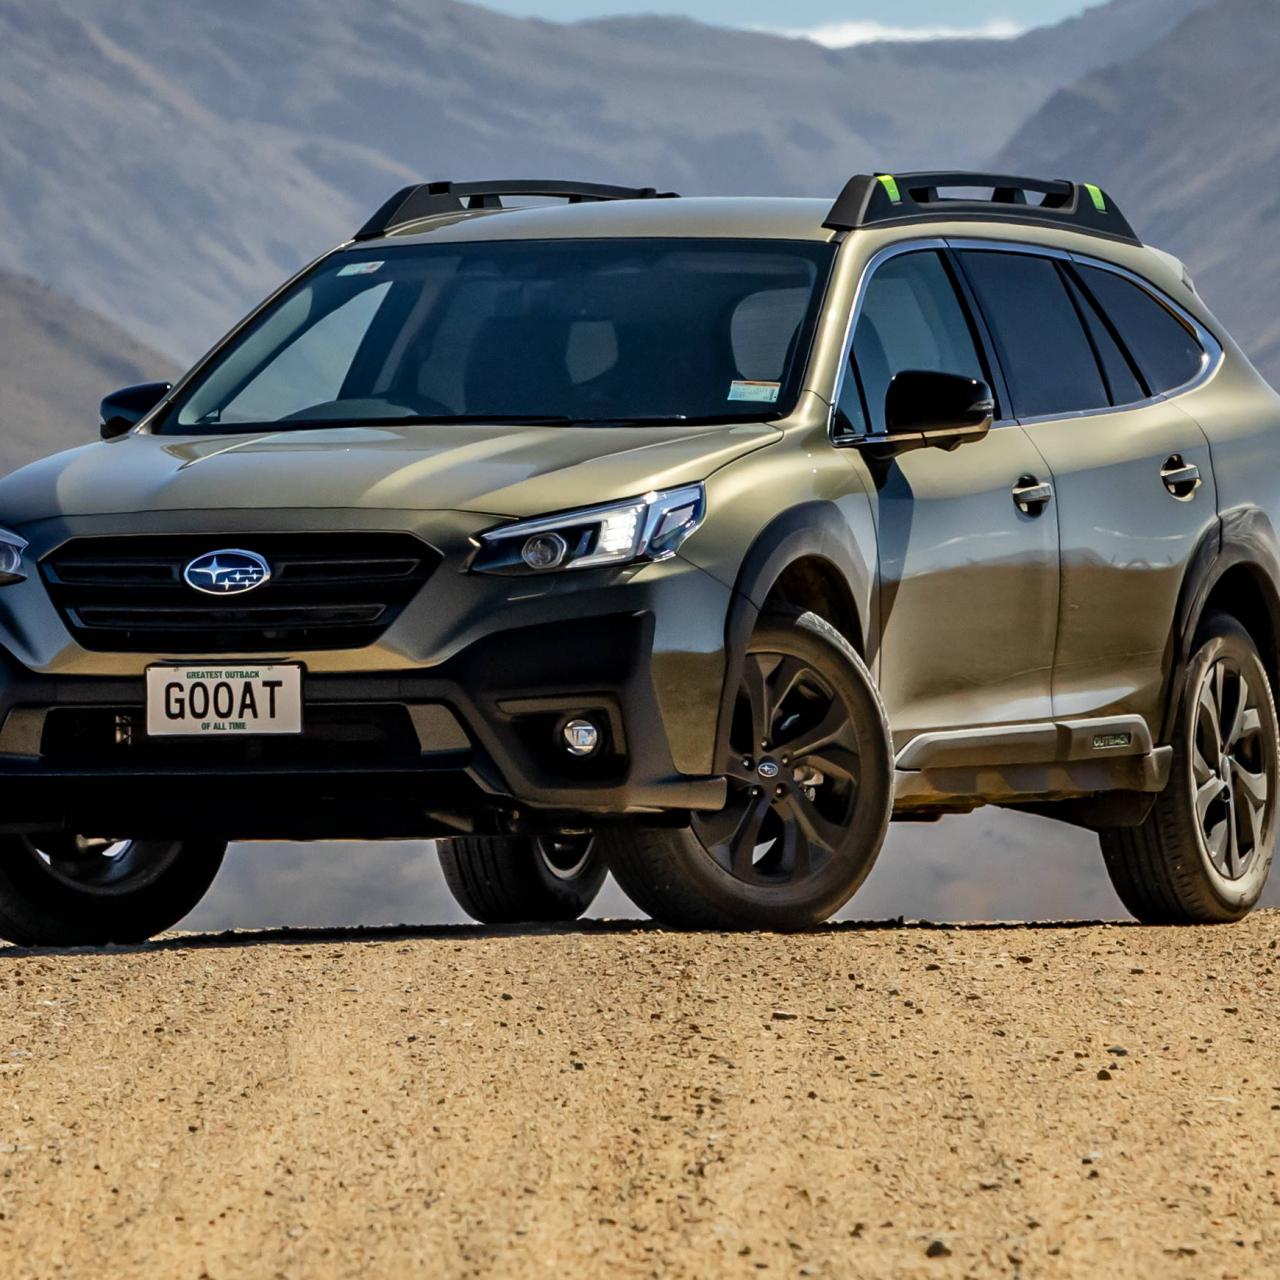 All-new Subaru Outback lands in NZ